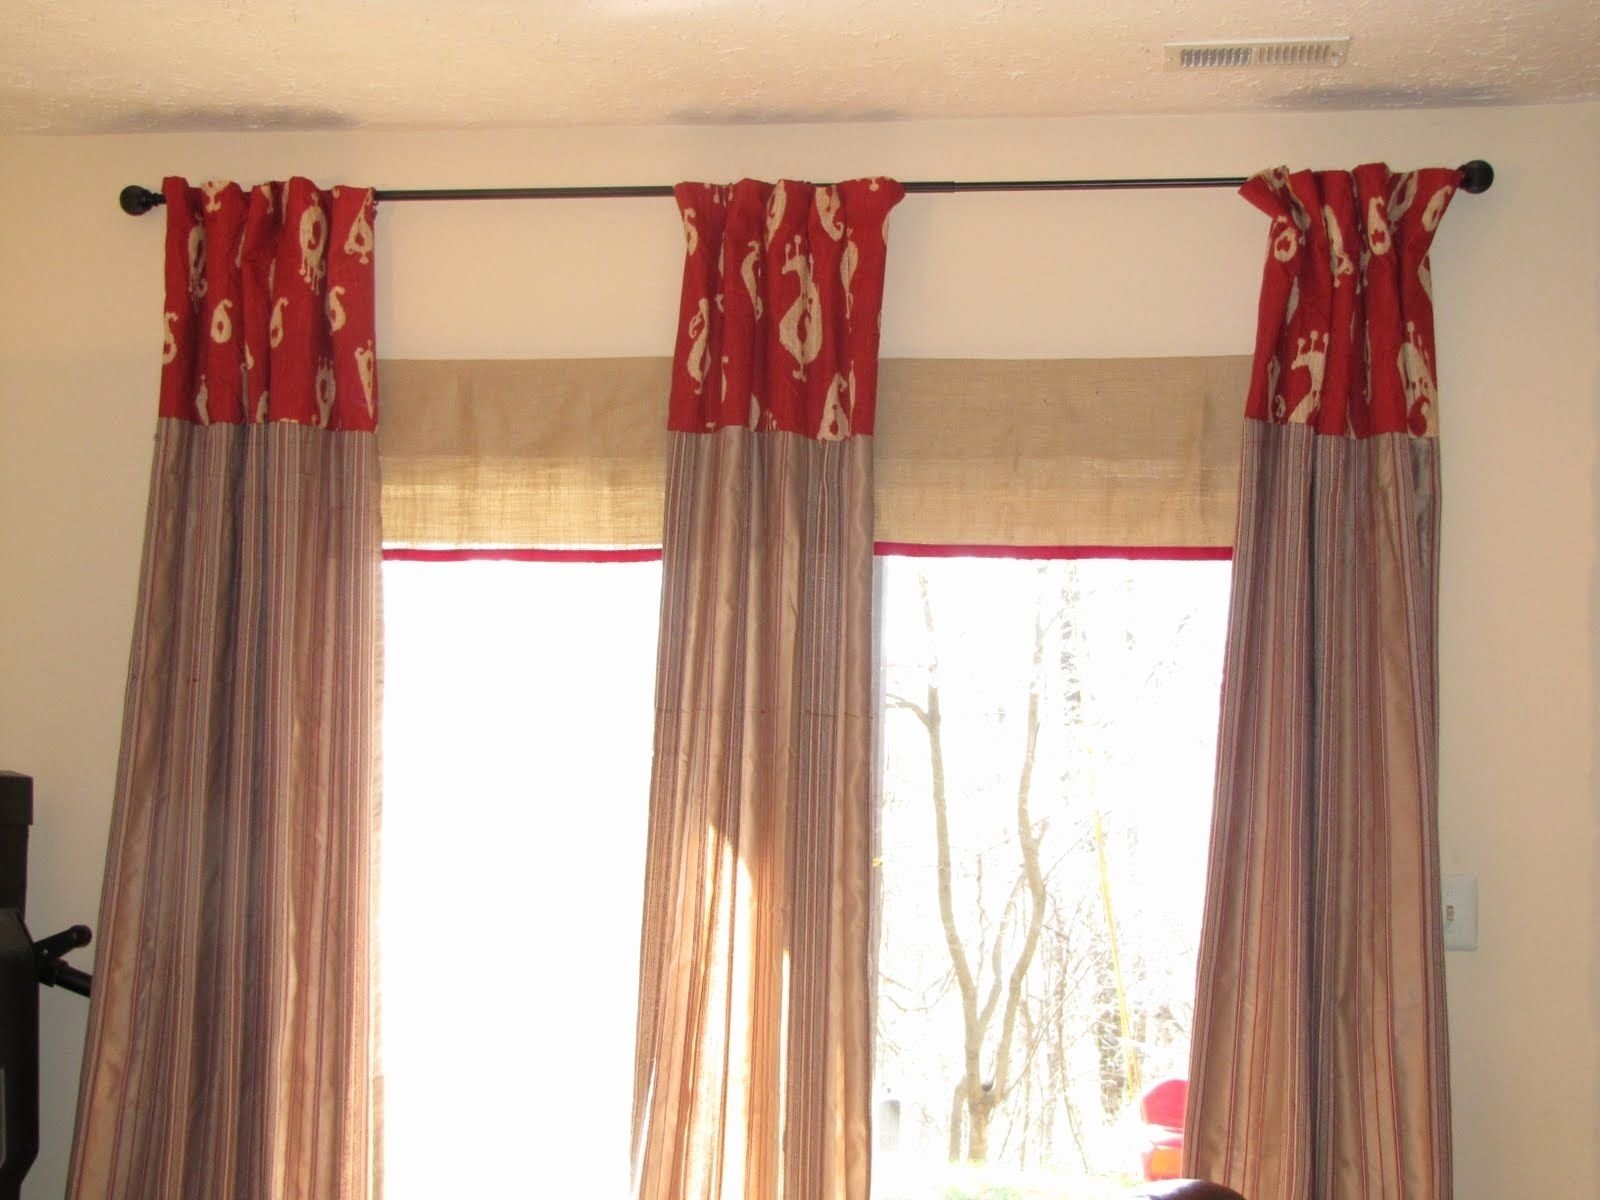 10 Most Popular Drapes For Sliding Glass Doors Ideas awesome elegant grommet top curtains for sliding glass doors ideas 2022